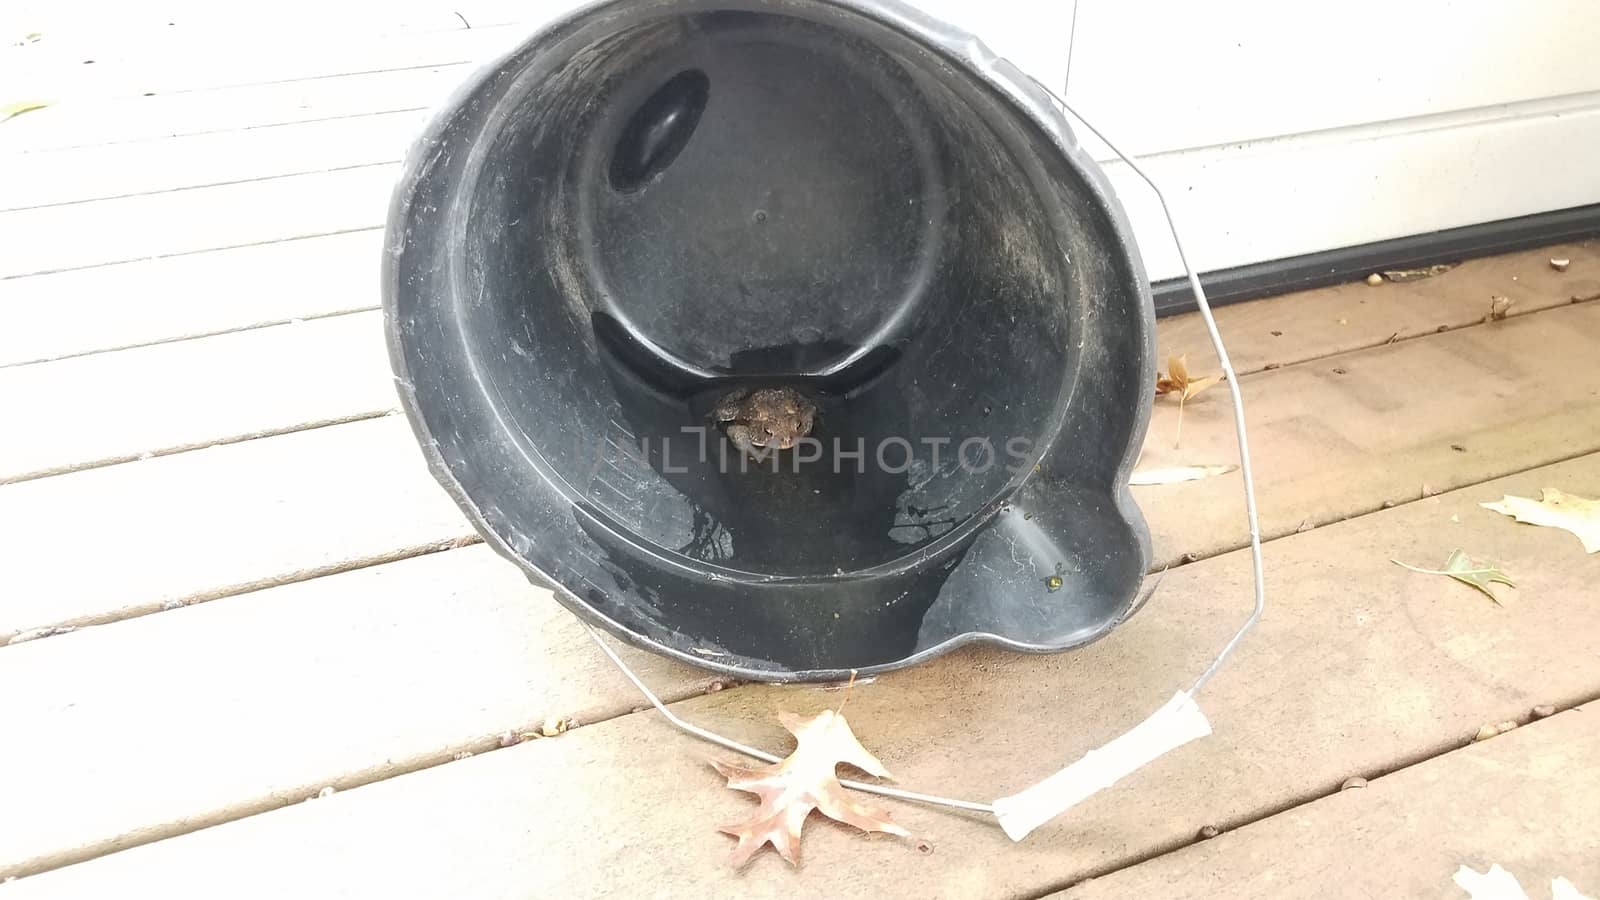 brown frog or toad amphibian in black plastic bucket with water